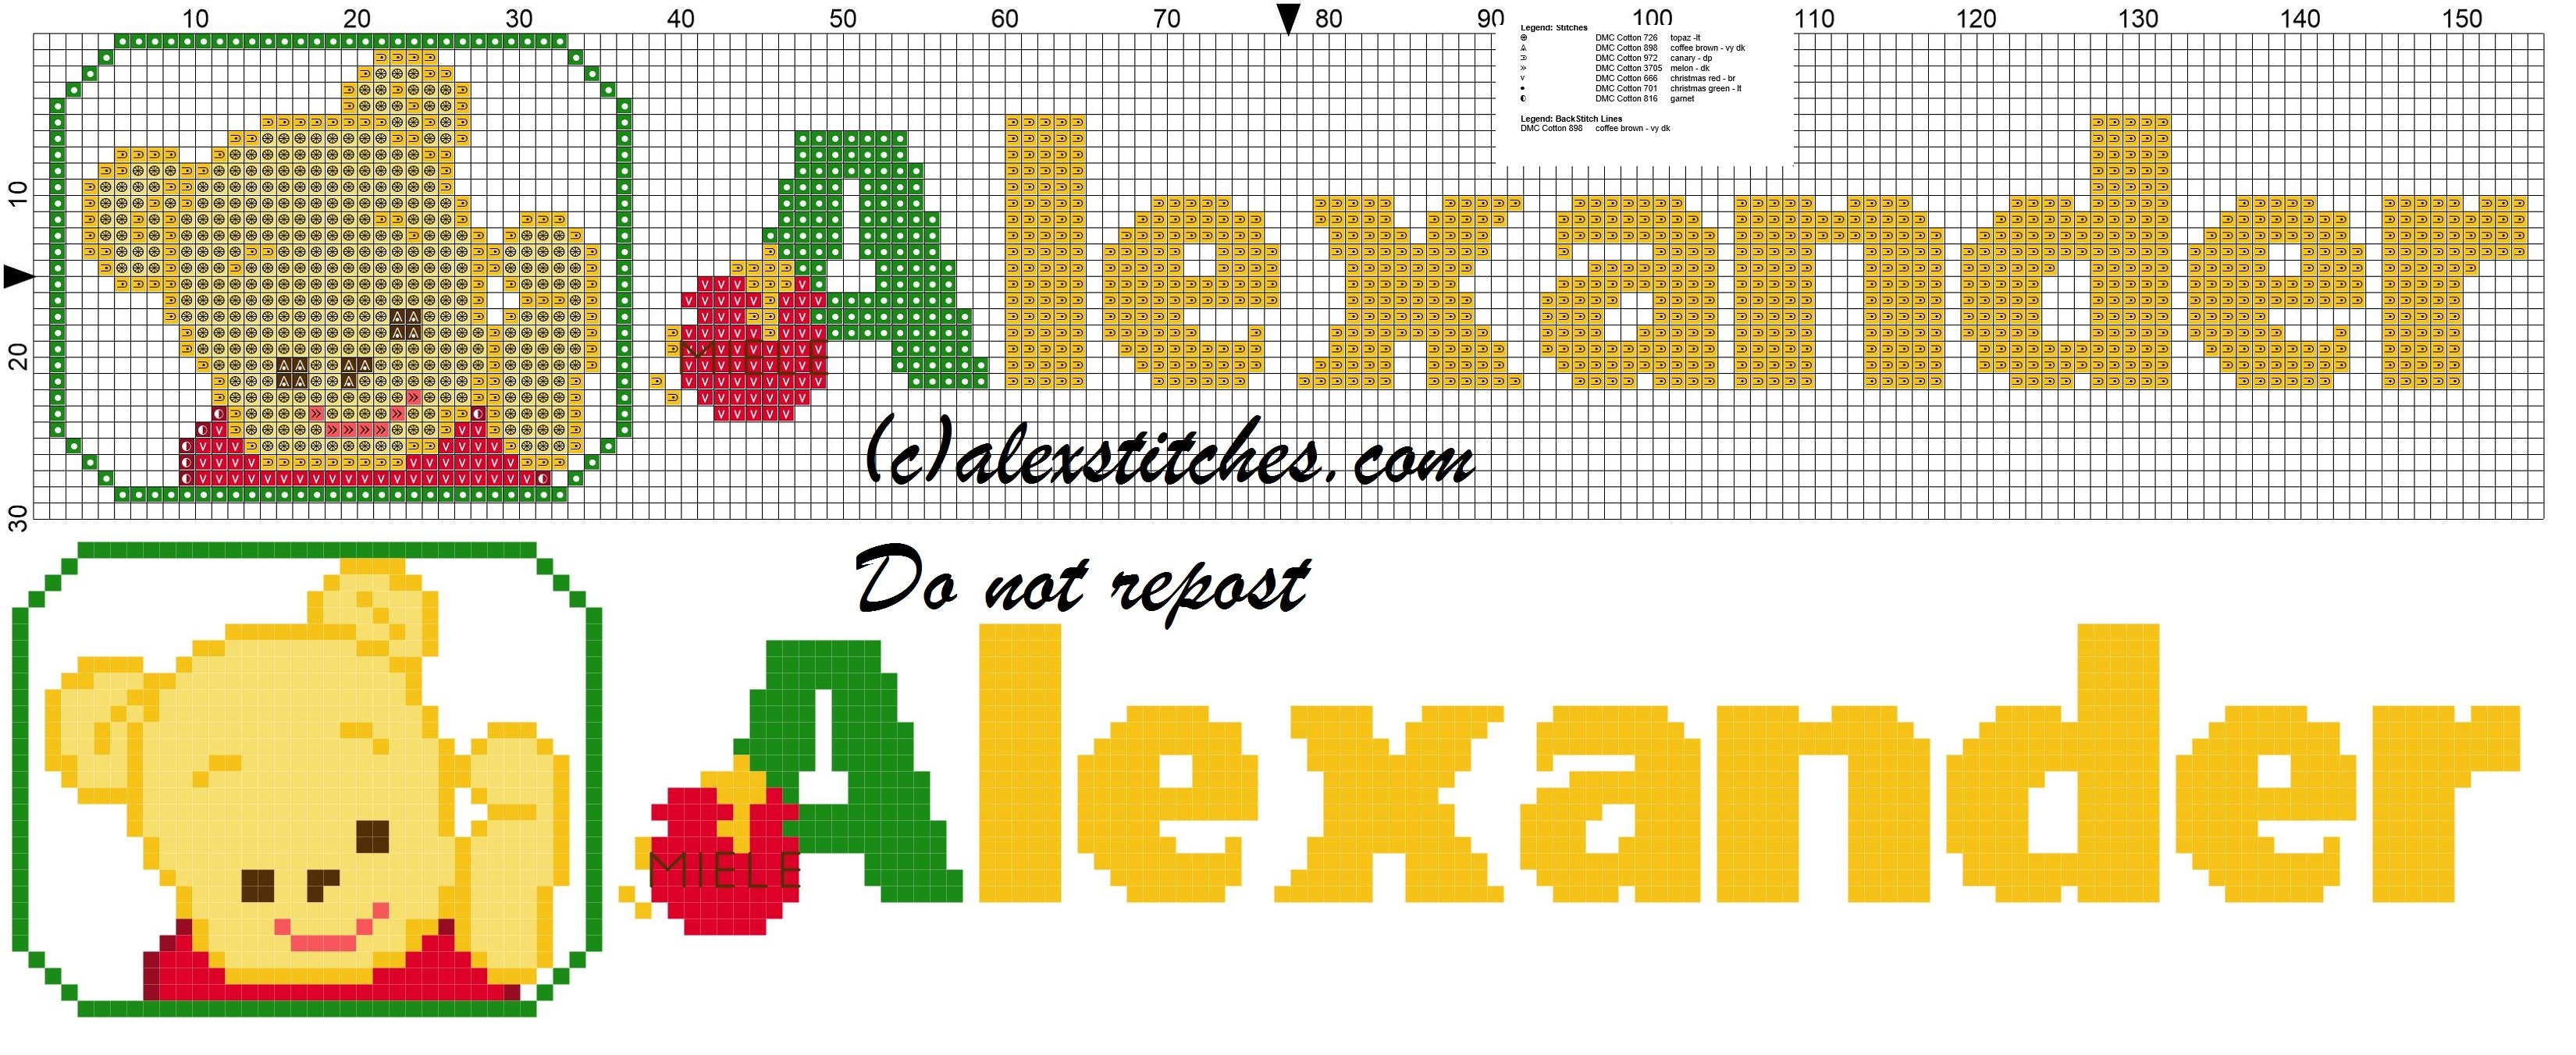 Alexander name with Baby winnie the pooh free cross stitches pattern